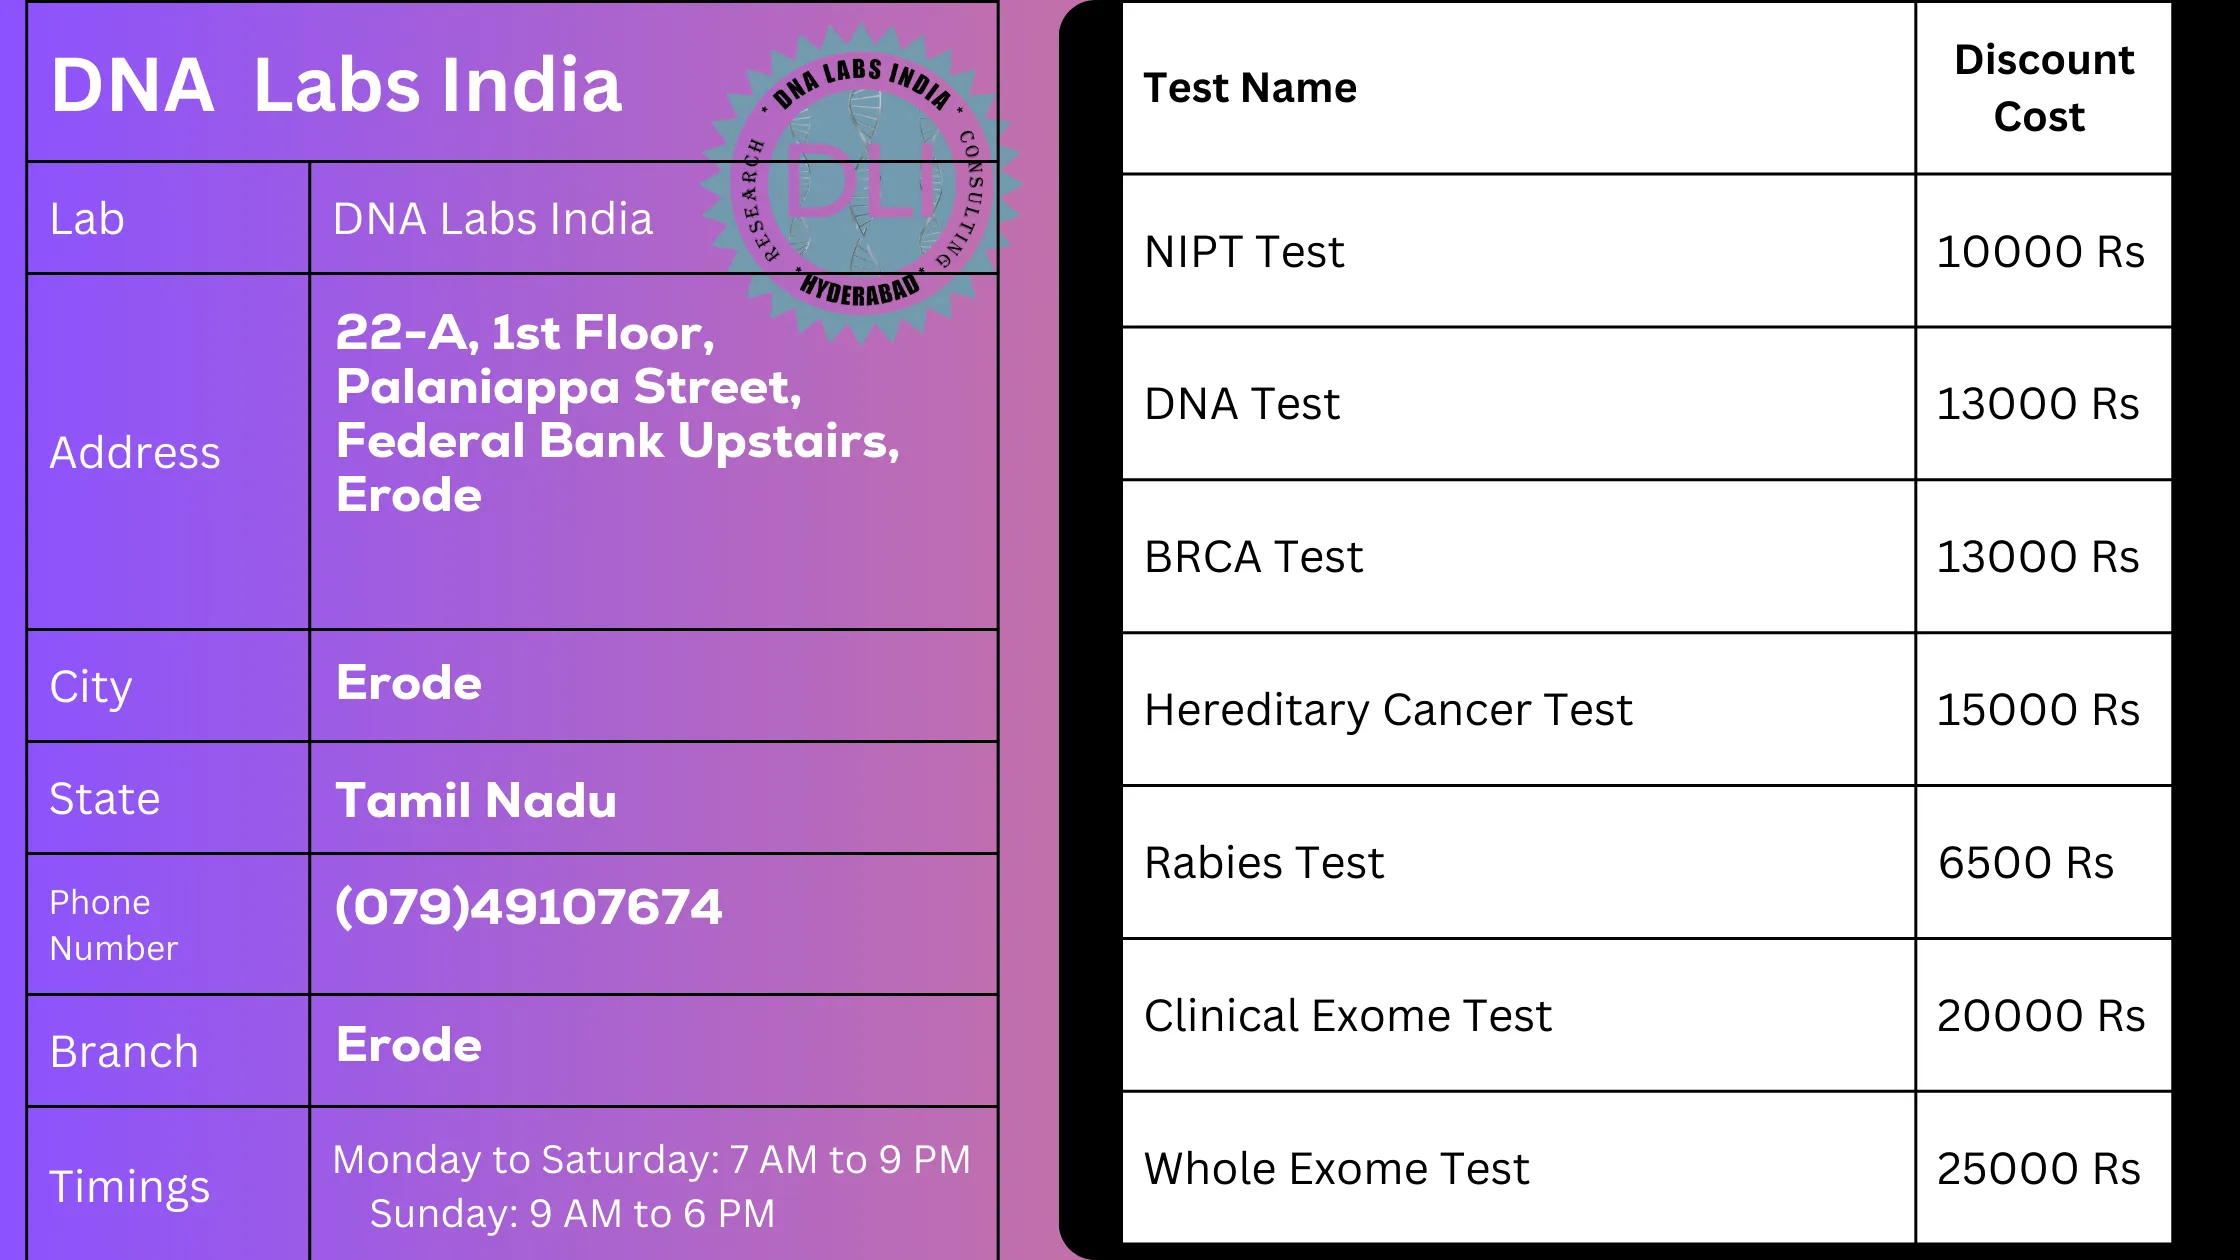 DNA Labs India: Your Trusted DNA Testing Partner in Erode